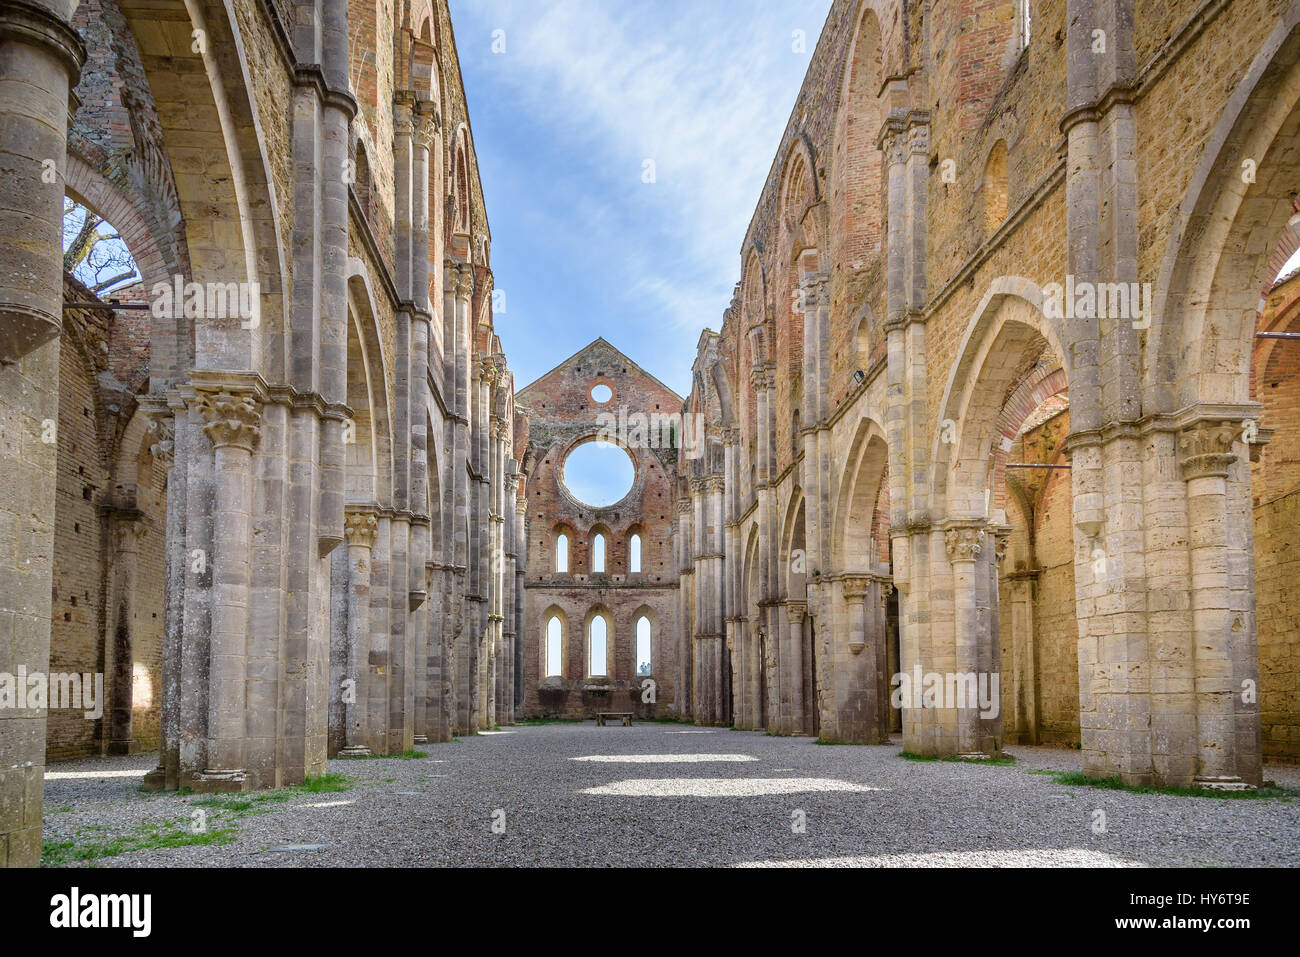 The abbey of San Galgano was a monastery , situated near Siena. The roofless walls of the Gothic style 13th-century still stand Stock Photo